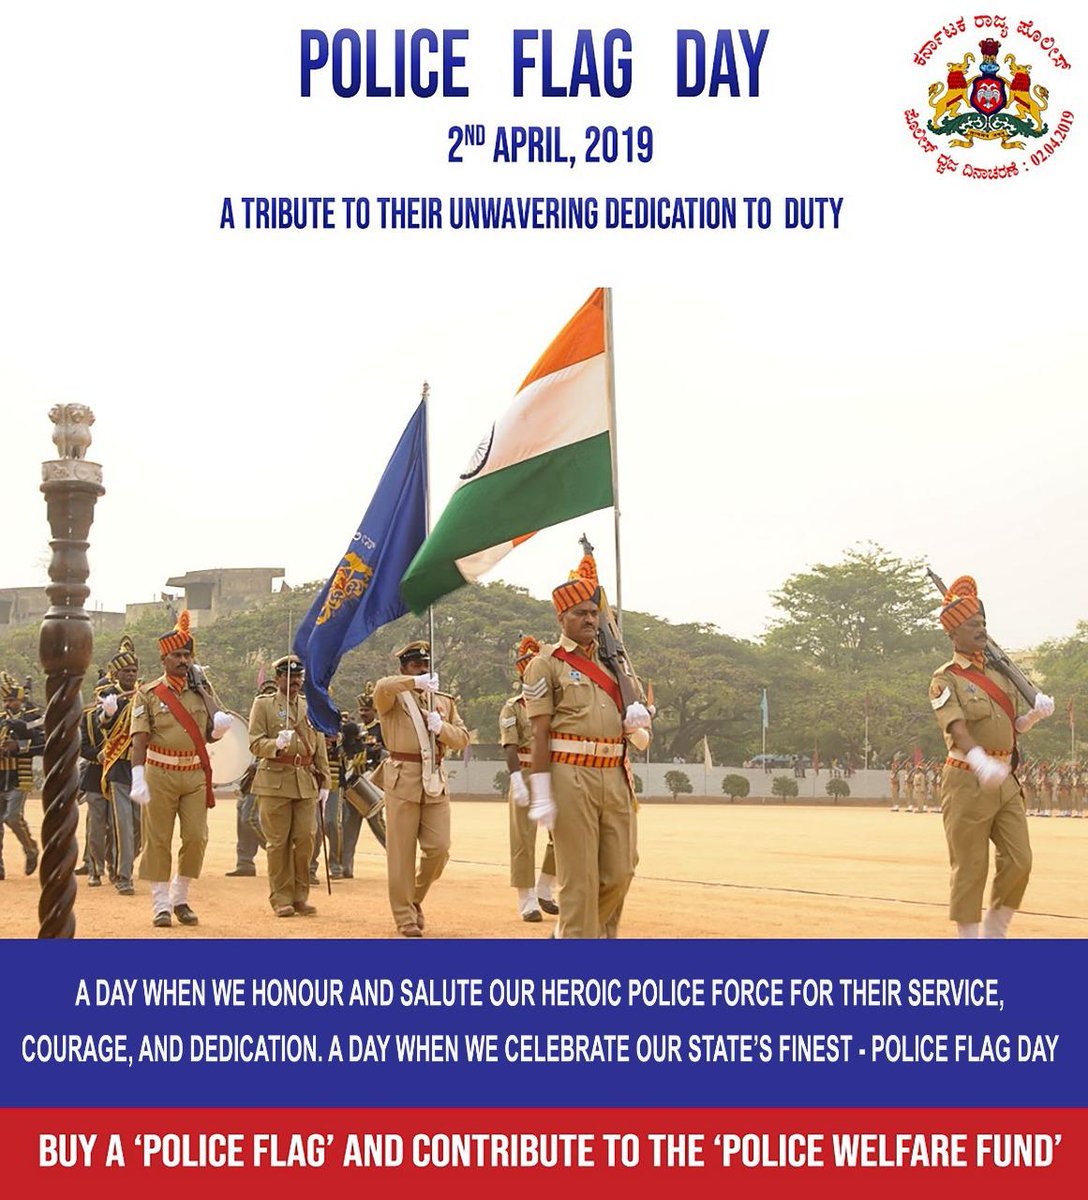 Tributes to brave police personnel on #PoliceFlagDay for their tireless service, unflinching courage & utmost dedication in maintaining Law & Order in our Society.

To provide uniformity the Karnataka Police Act 1963, came into force from 2 April, 1965.

#TuesdayThoughts #KXIPvDC